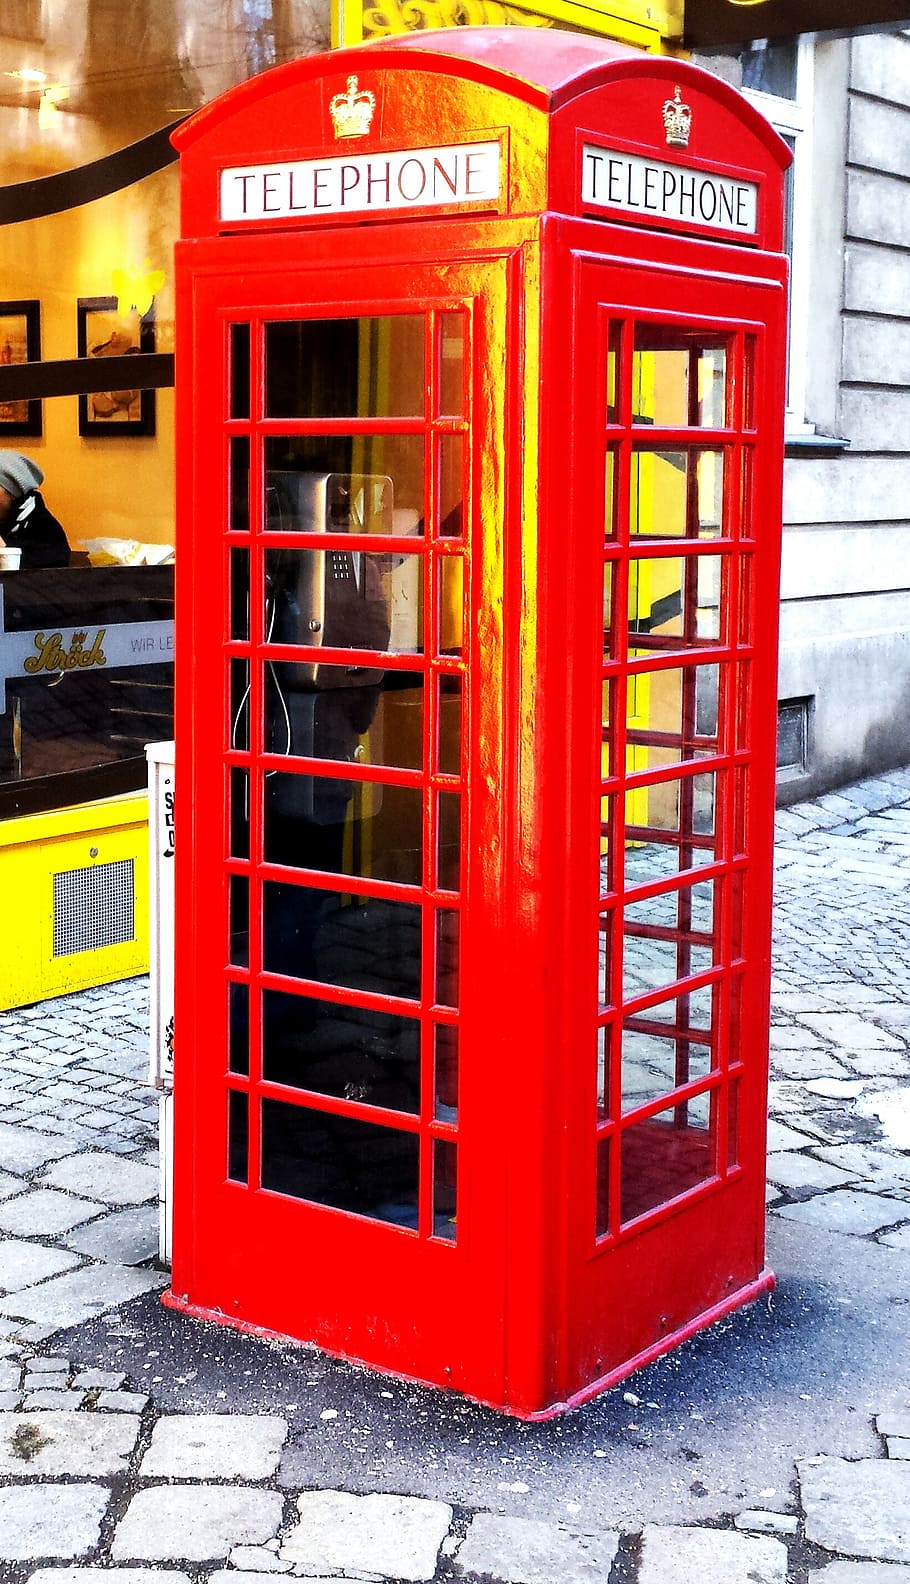 phone booth, phone, mobile phone, old, dispensary, telephone, communication, telephone house, call, payphone